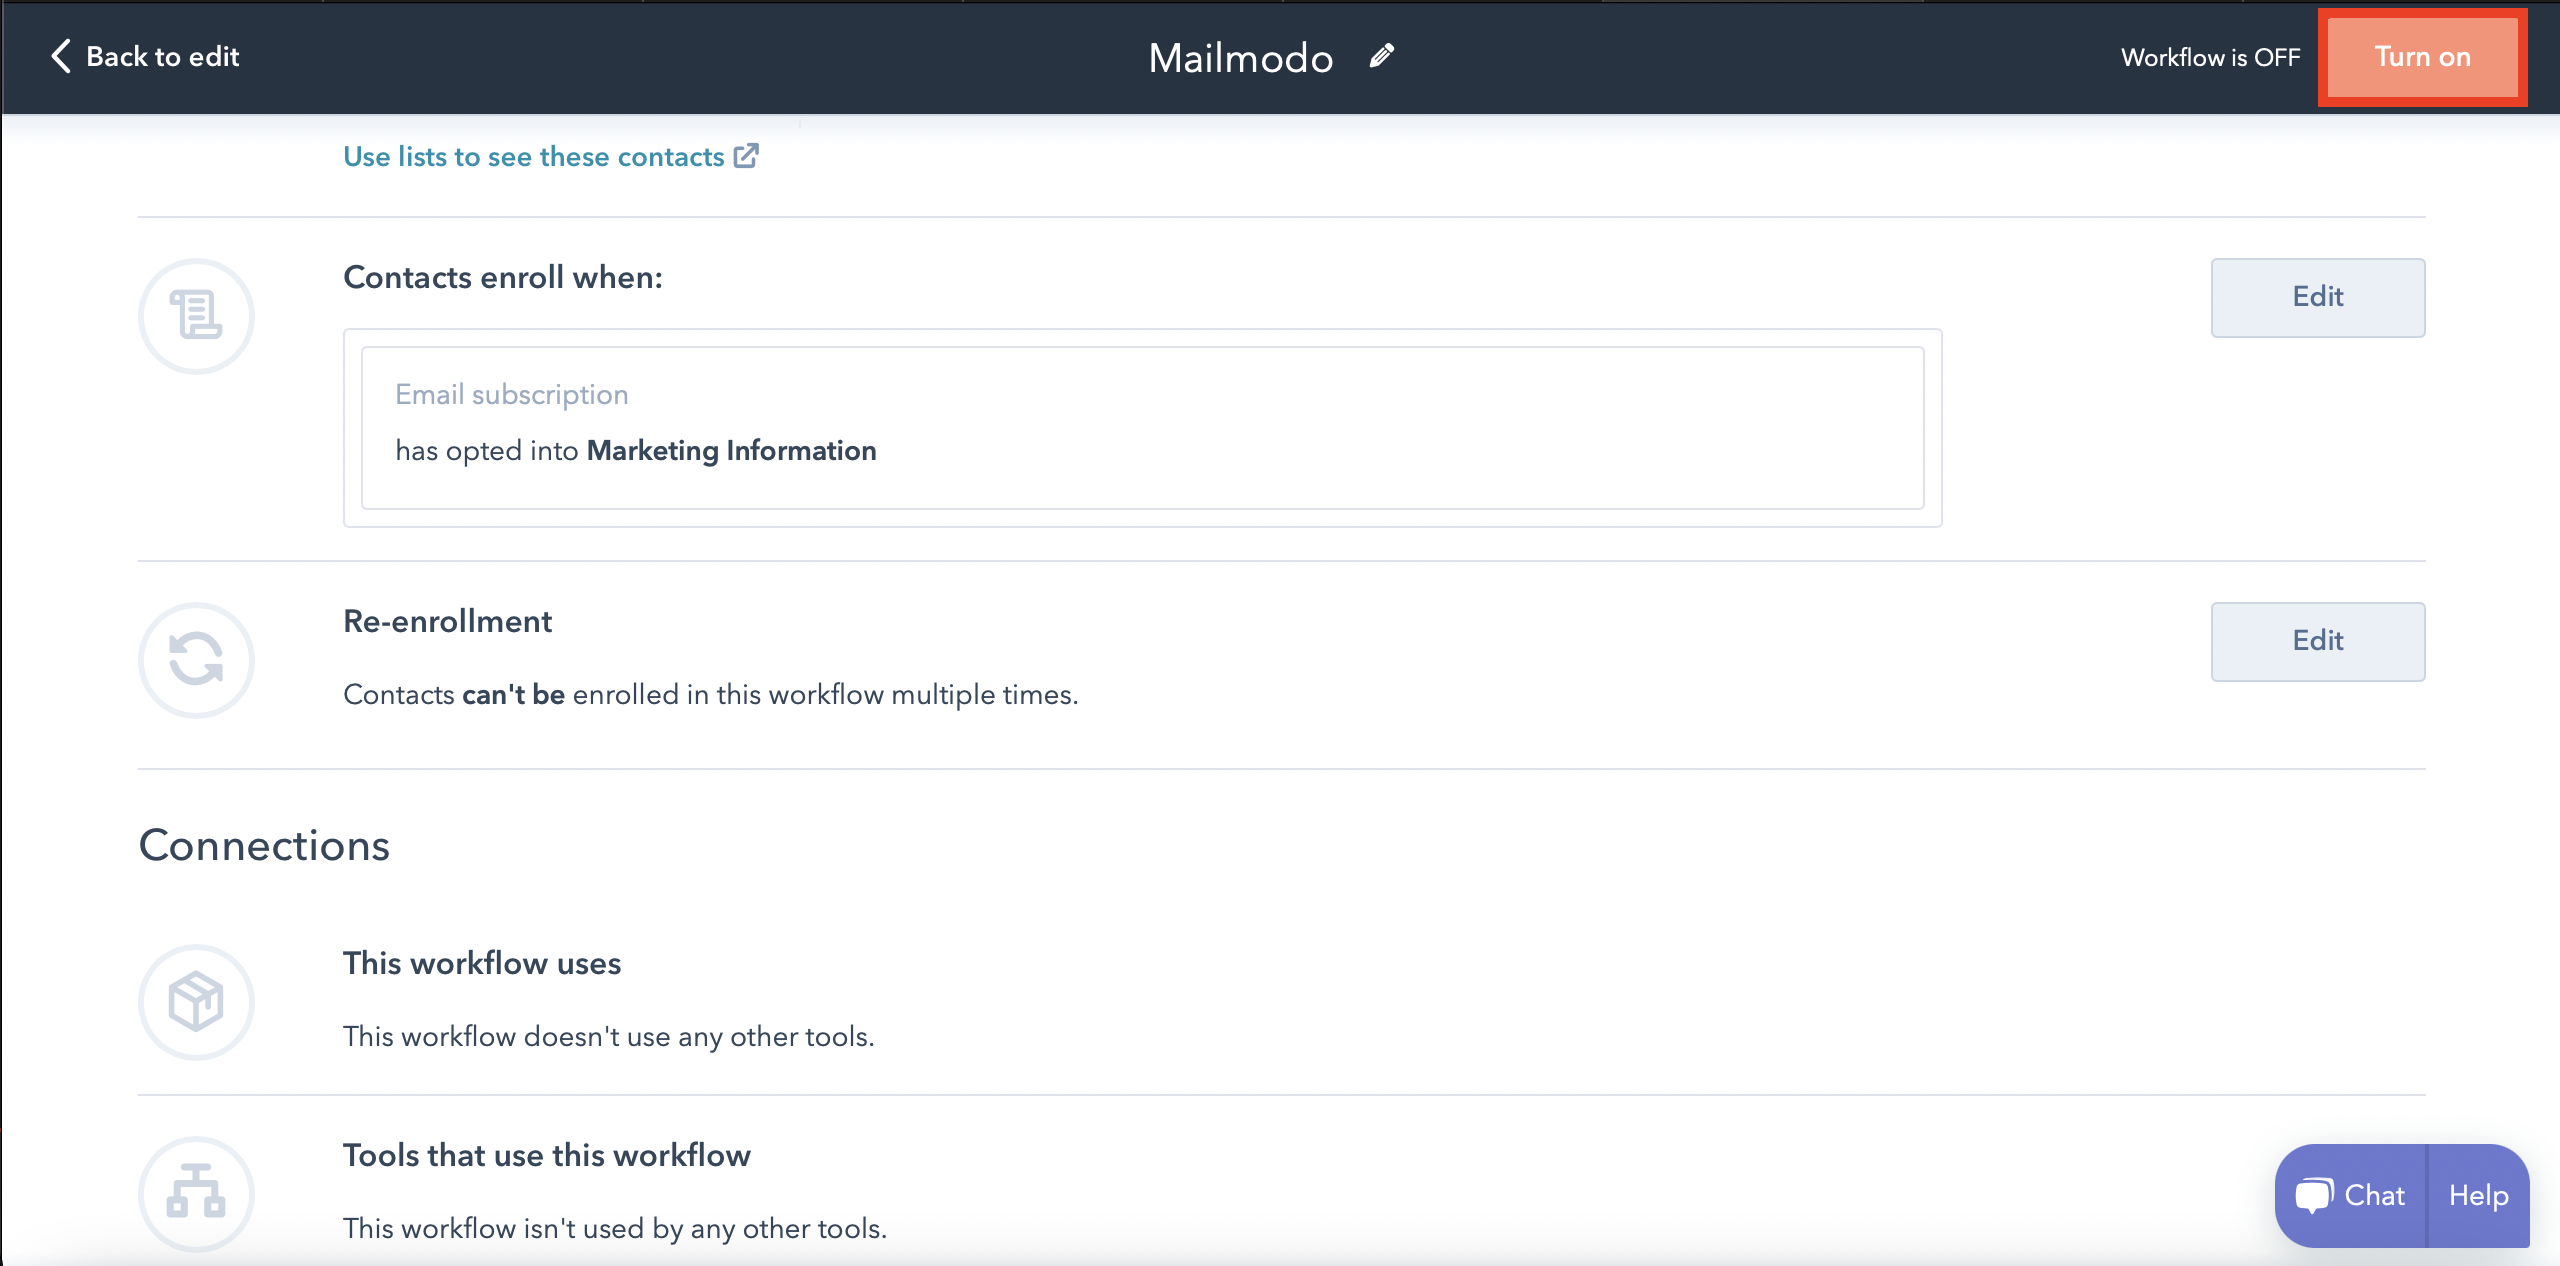 How to trigger emails in Mailmodo through HubSpot